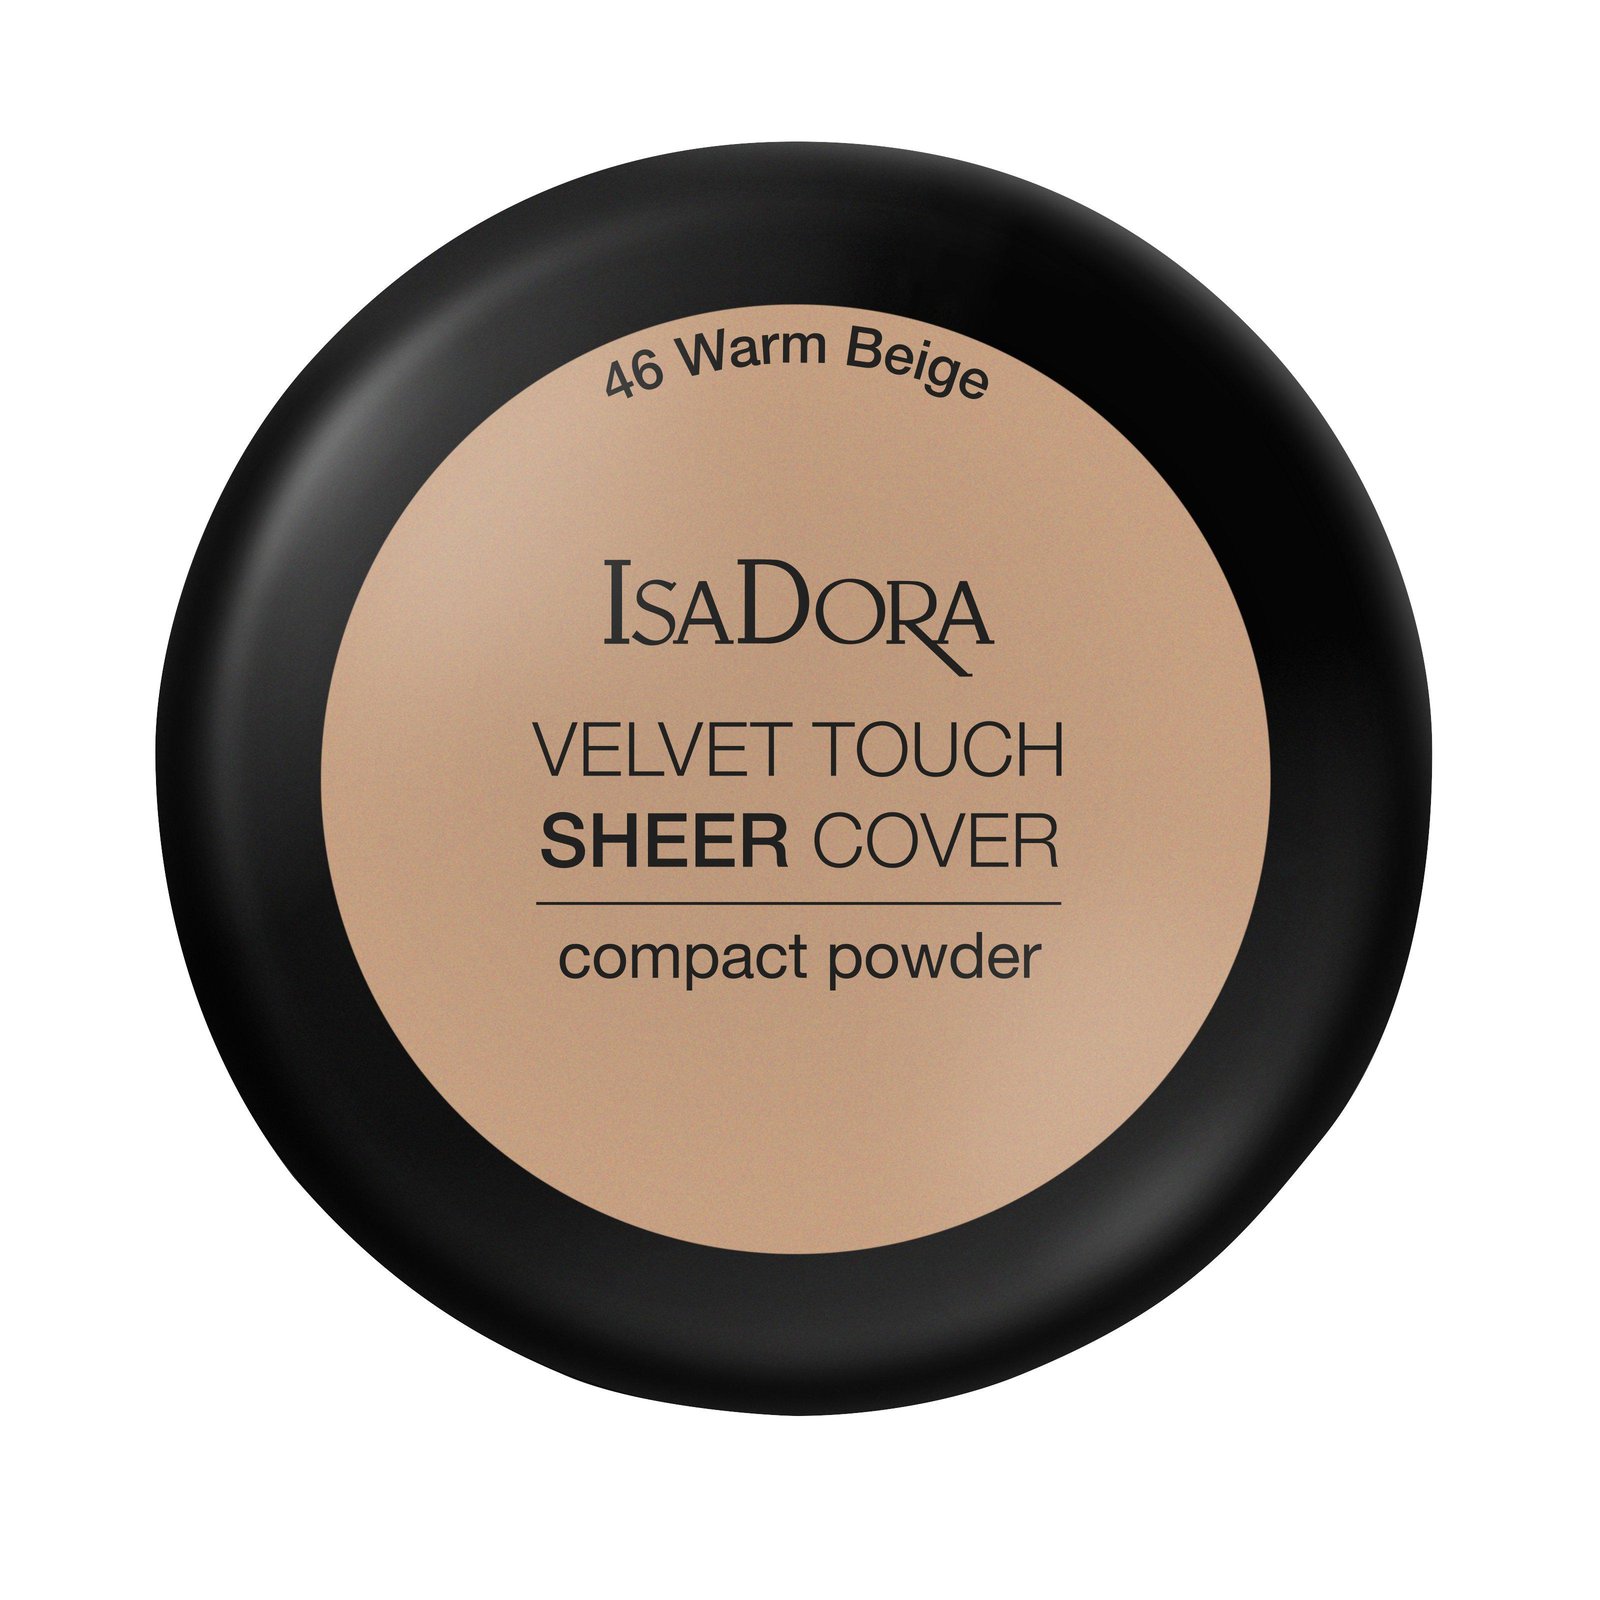 IsaDora Velvet Touch Sheer Cover Compact Powder 46 Warm Beige